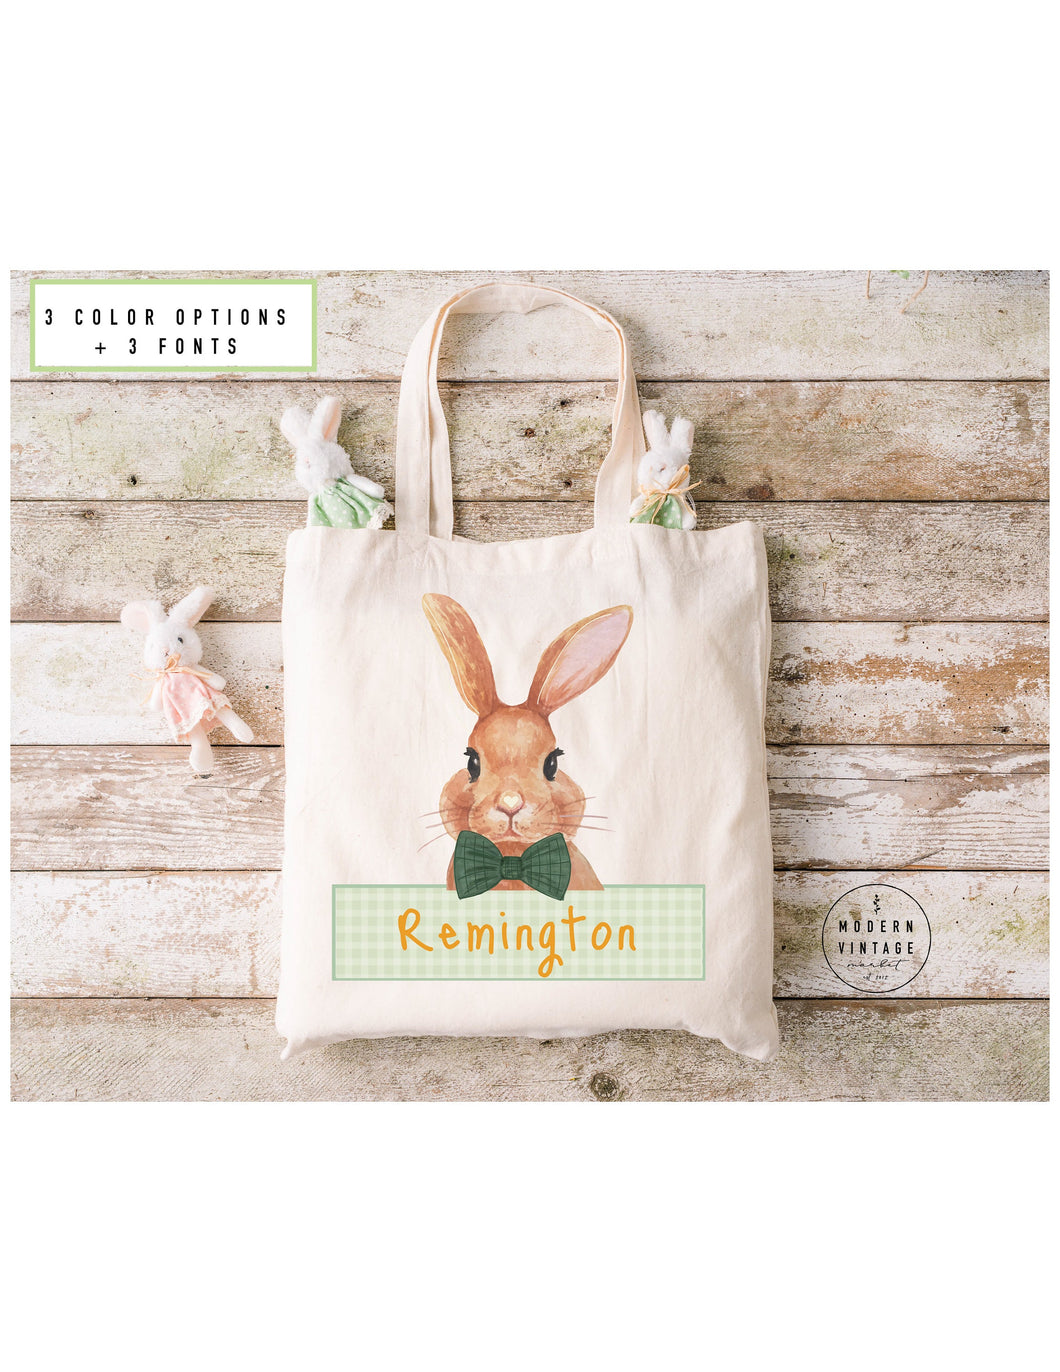 Personalized Easter Basket Tote Bag|Easter Gift Ideas|Easter Bunny Bags|Easter Tote Bag|Girls Easter Bag|Boys Easter Bag|Bunny Tote|GREEN